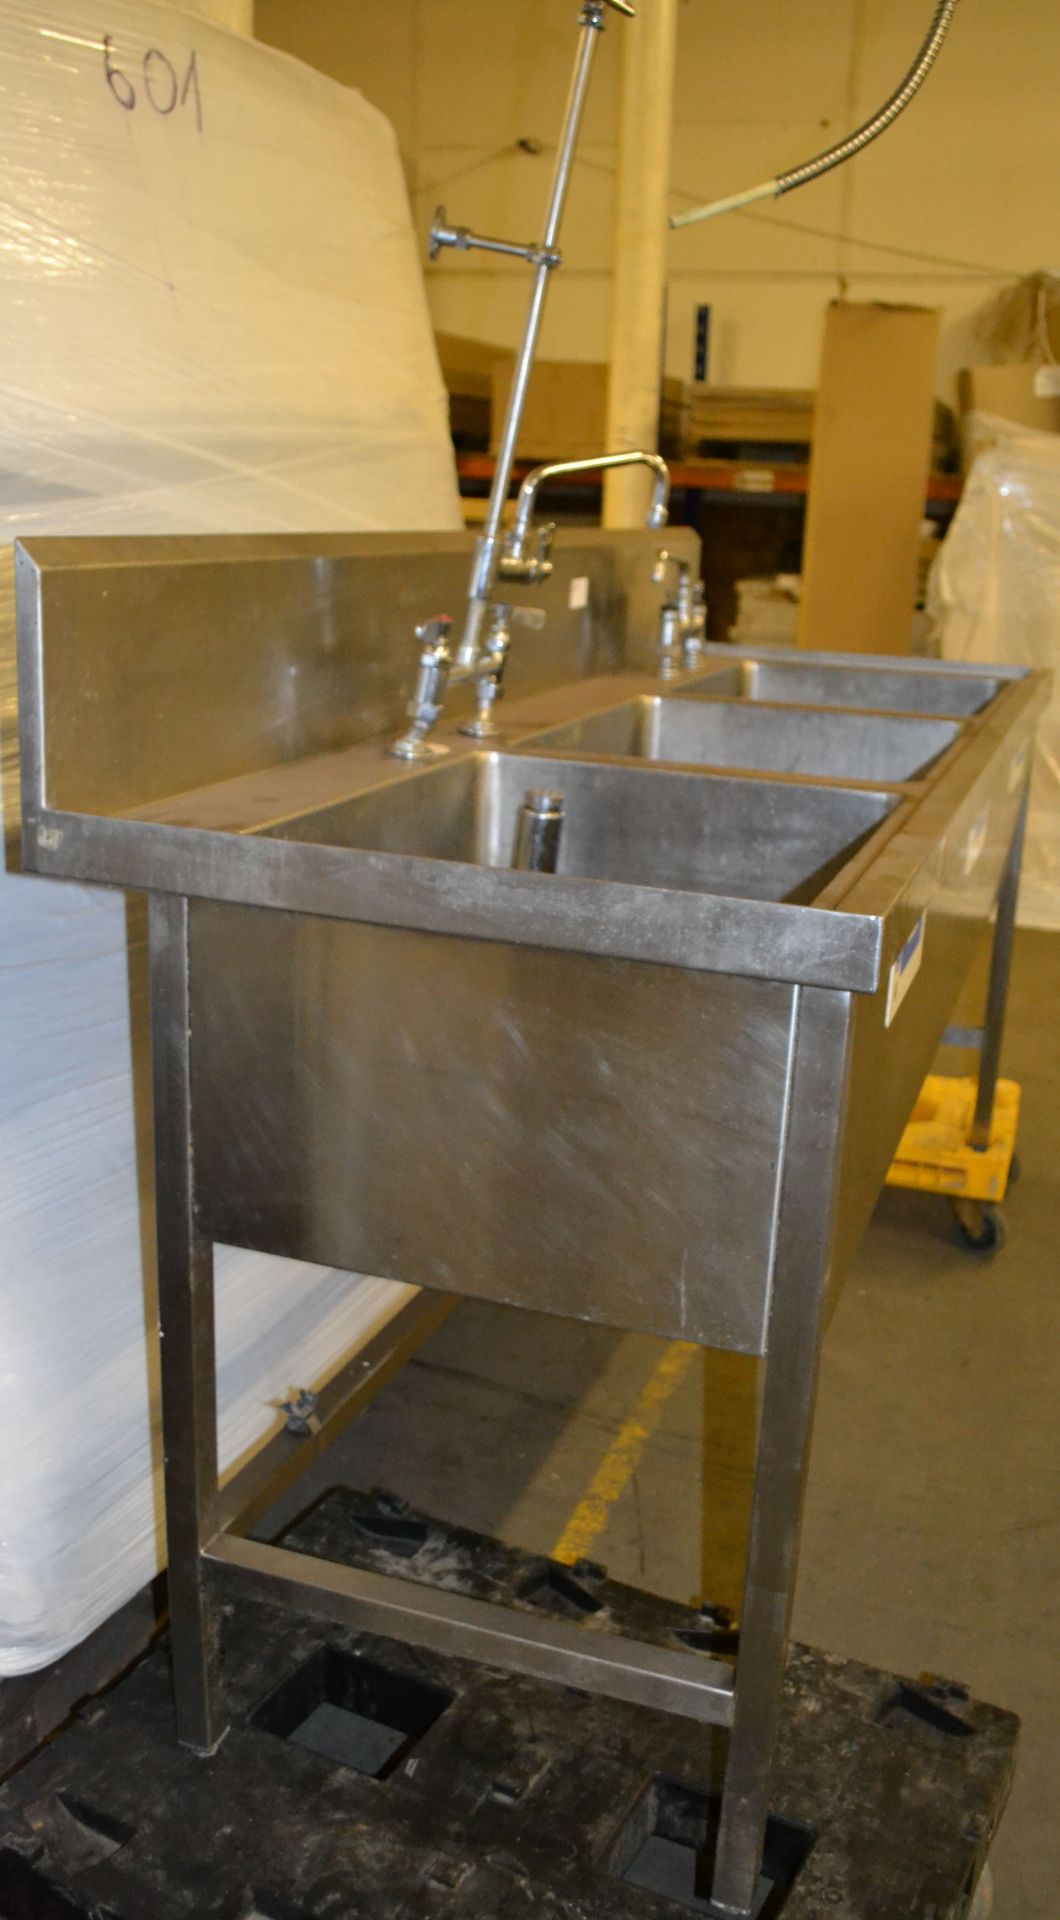 1 x Large Triple Sink Unit with Taps - Approx 190x66.5x108cm - Deep (approx. 30cm) Sinks - Ref:NCE03 - Image 5 of 9